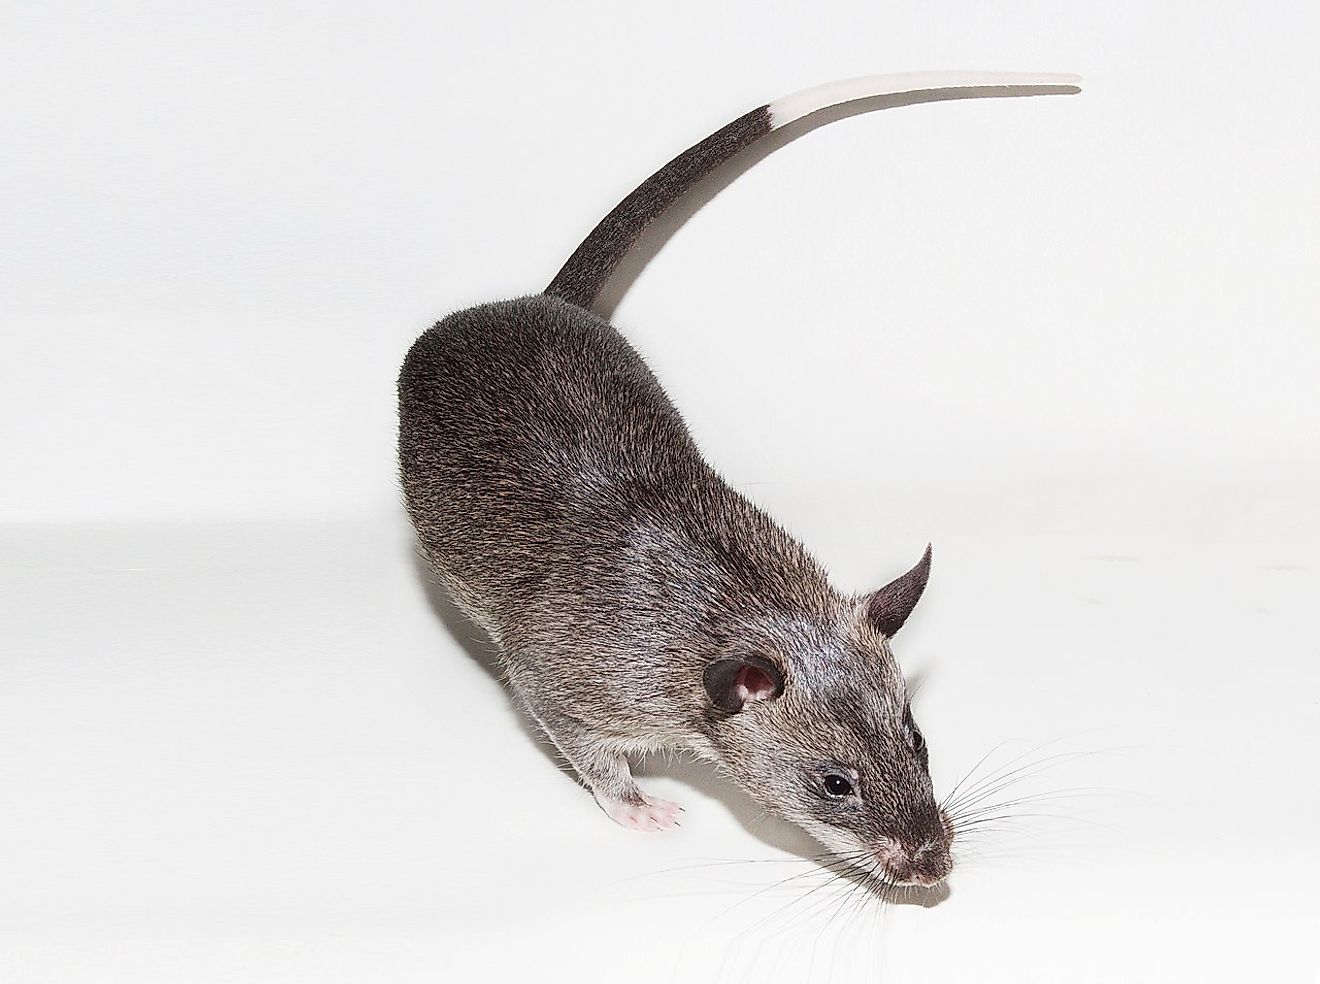 African giant pouched rat. Image credit: Louisvarley/Wikimedia.org